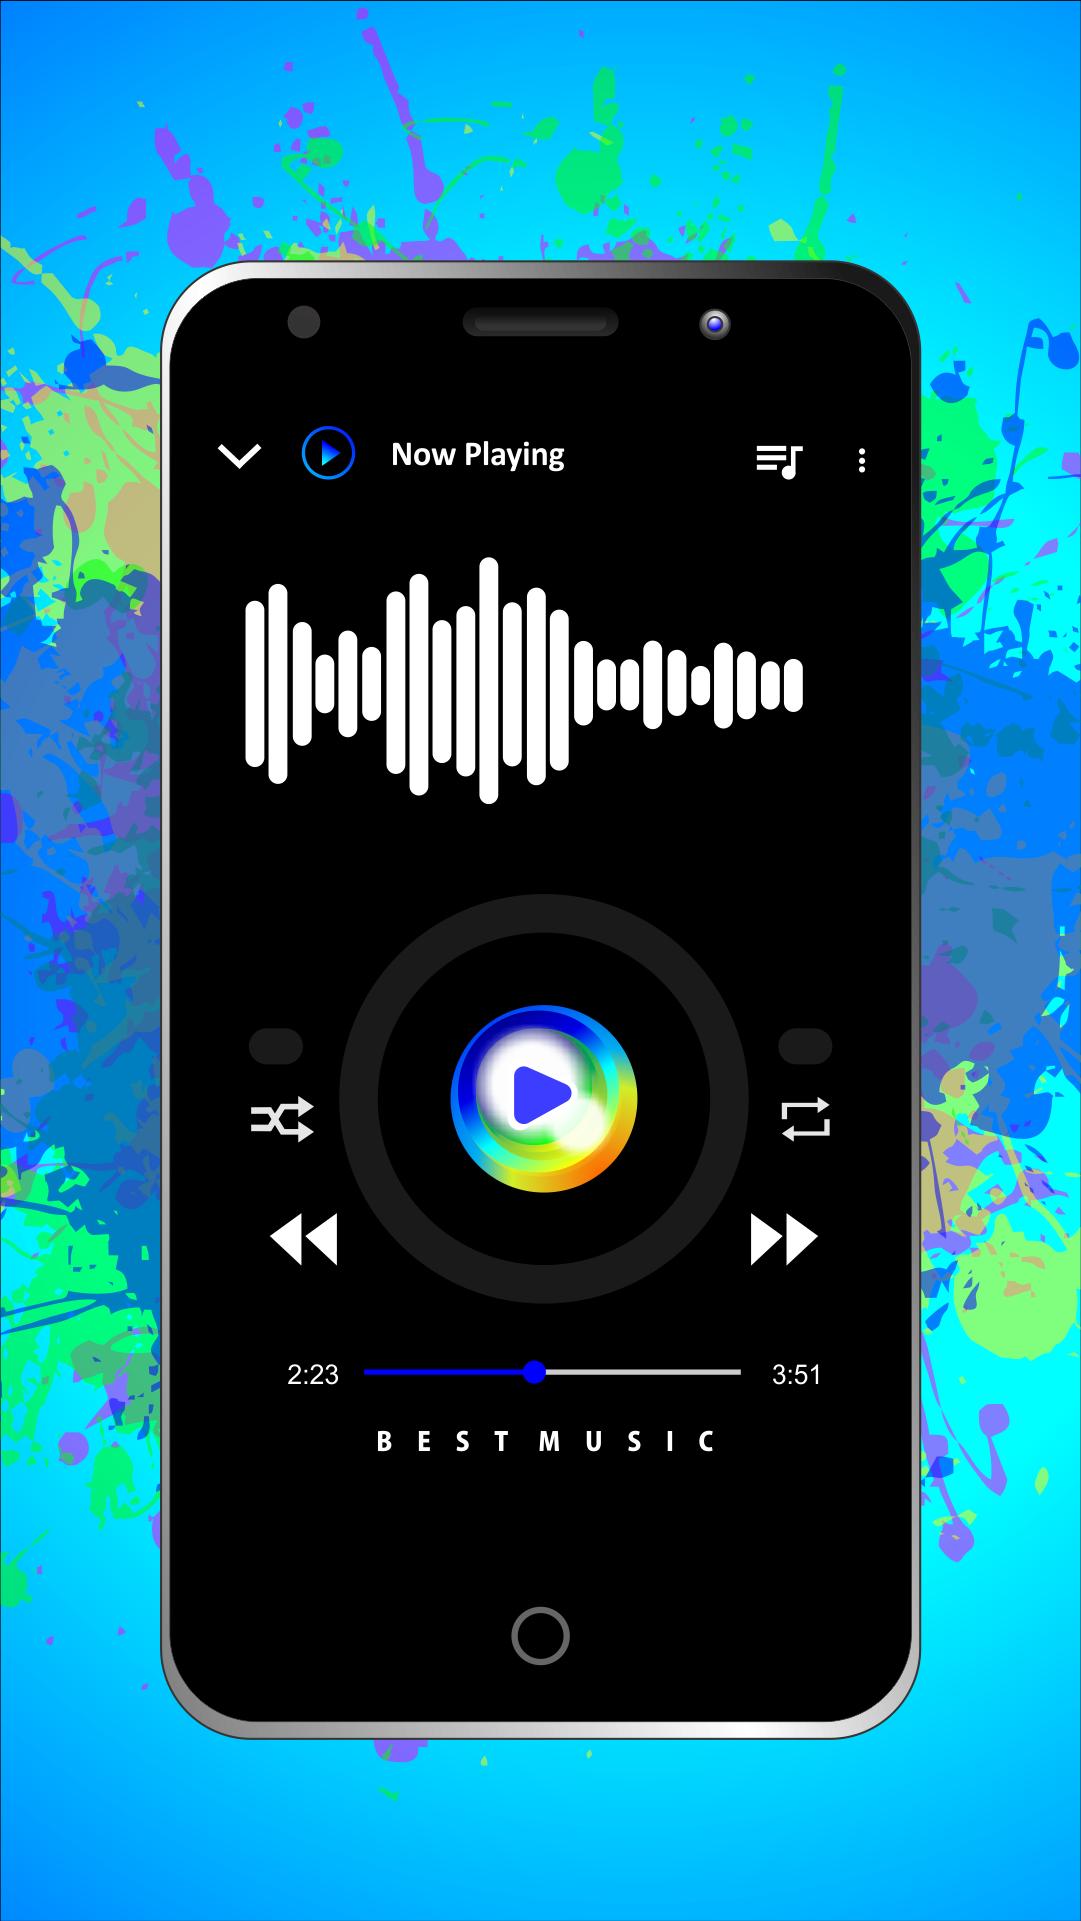 Numb - Linkin Park Mp3 for Android - APK Download